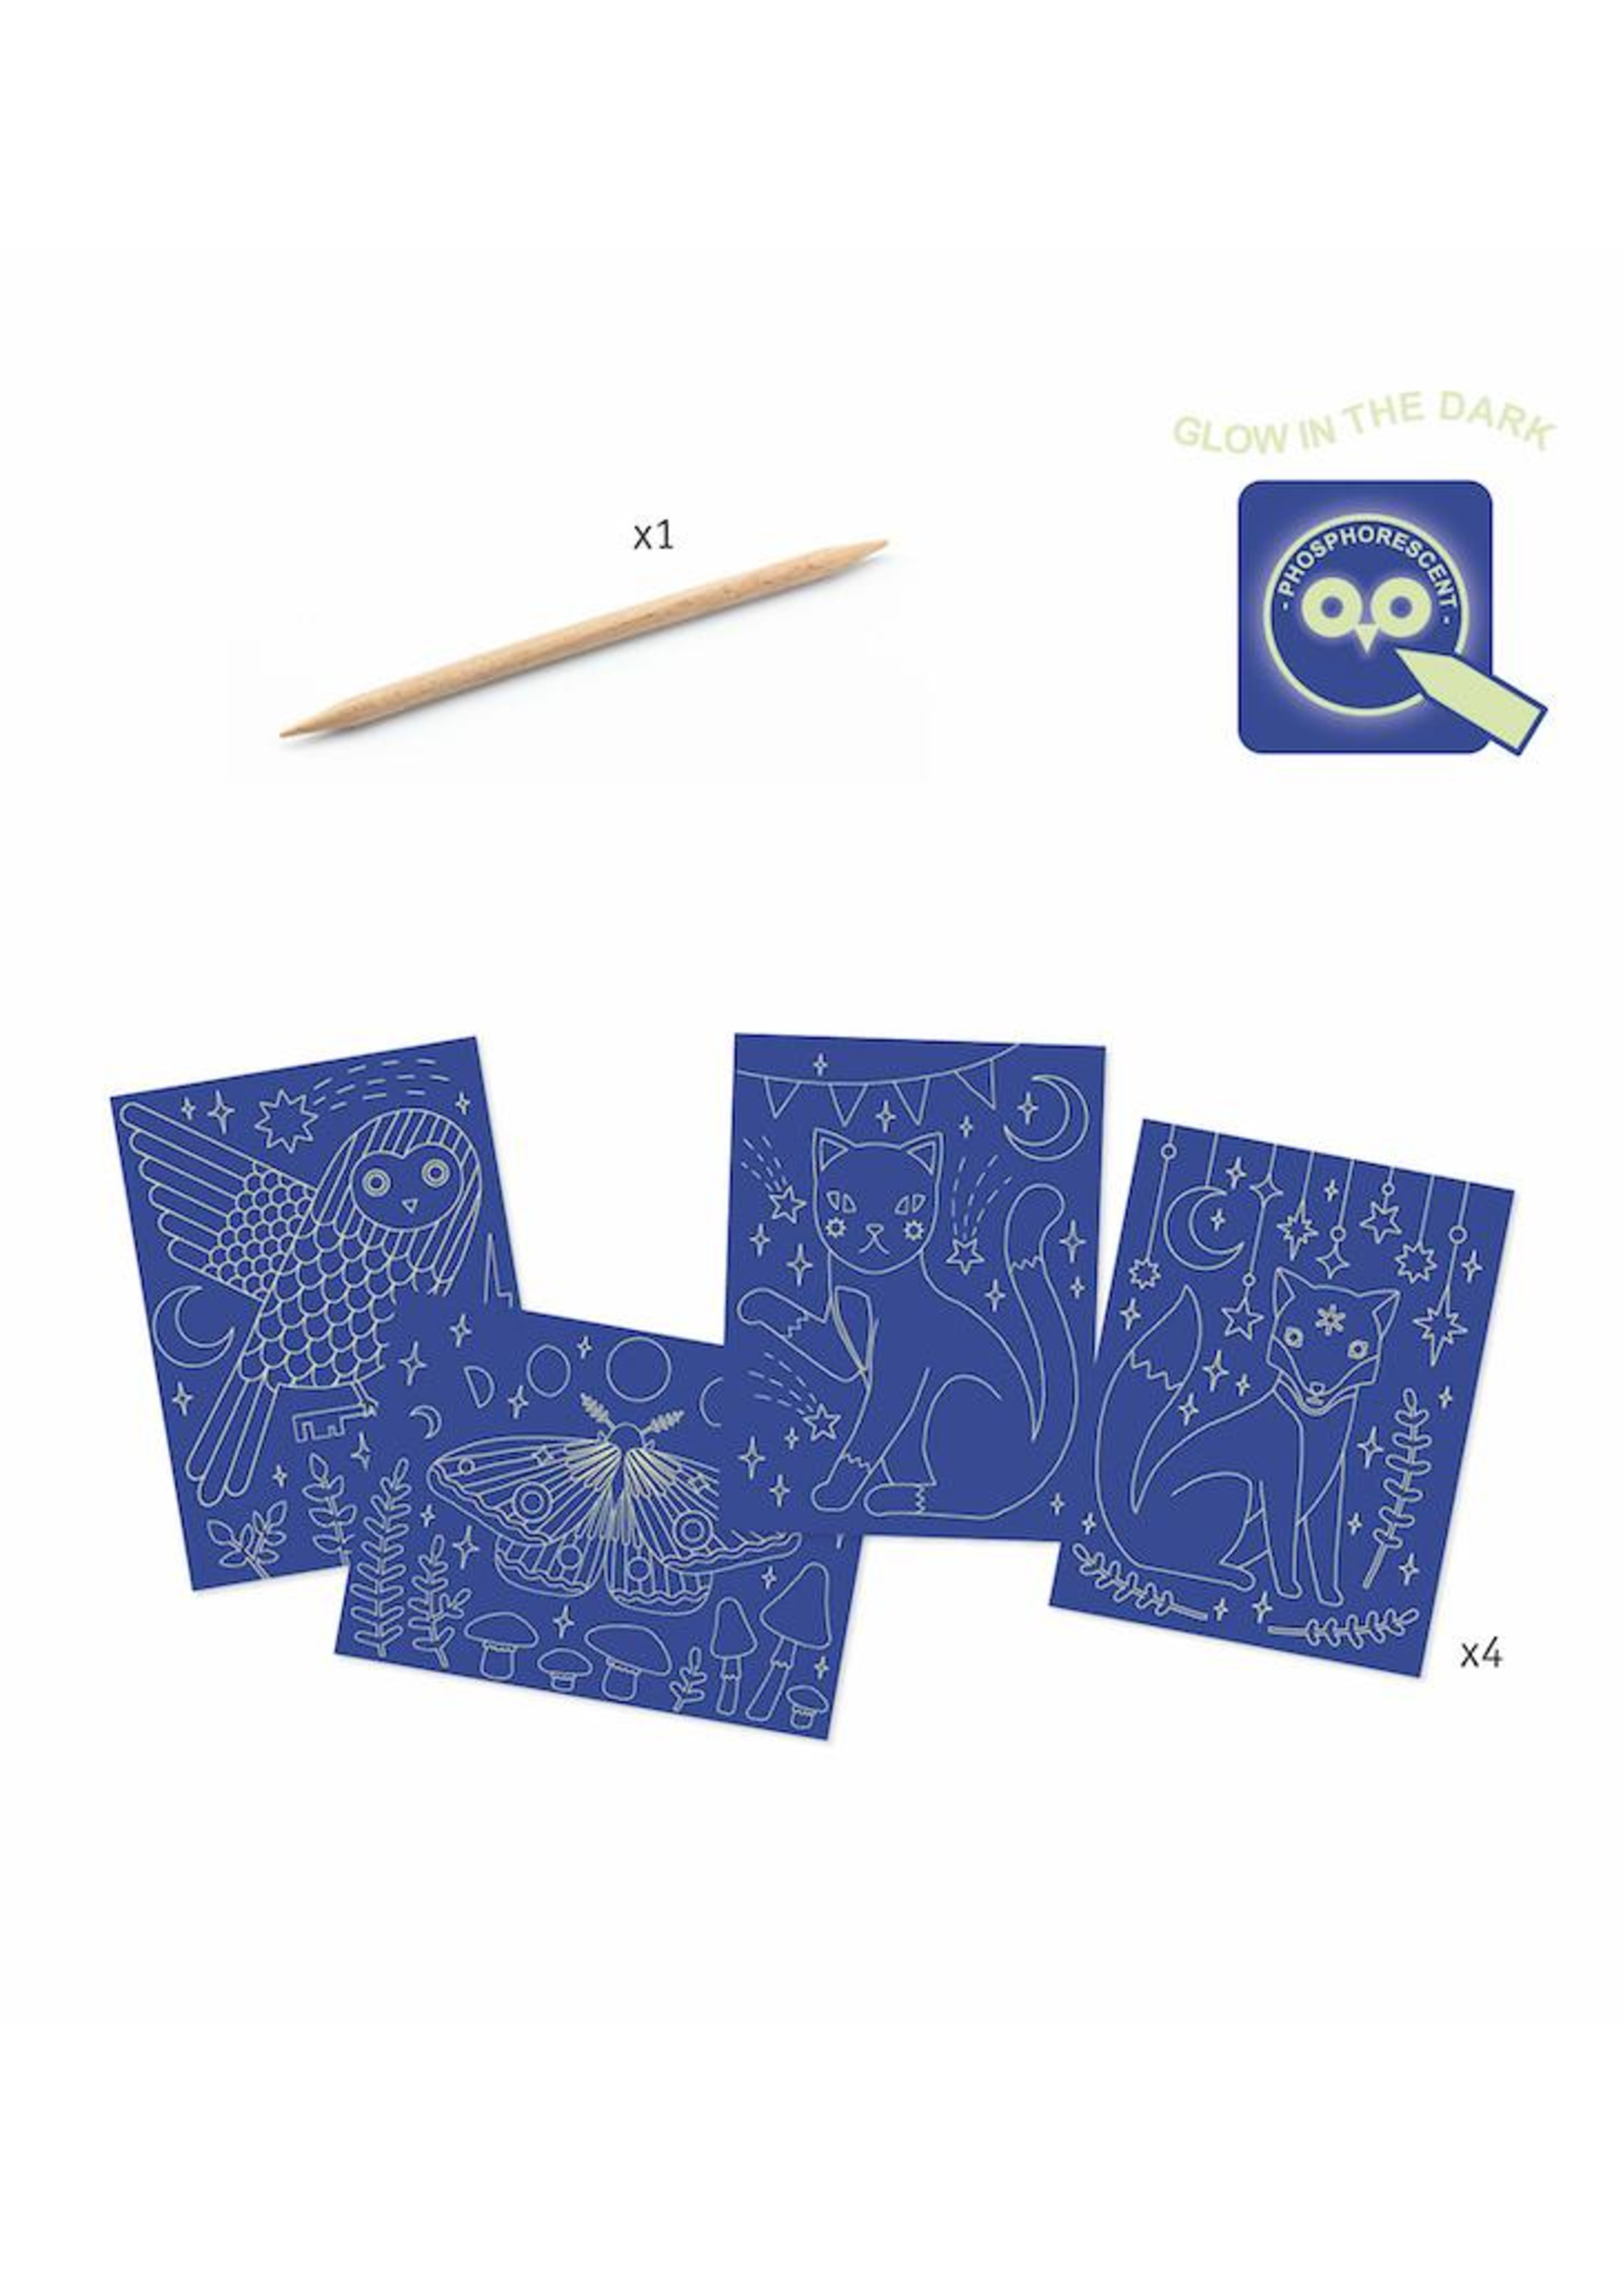 Djeco At Night Glow-in-the-Dark Scratch Card Activity Set